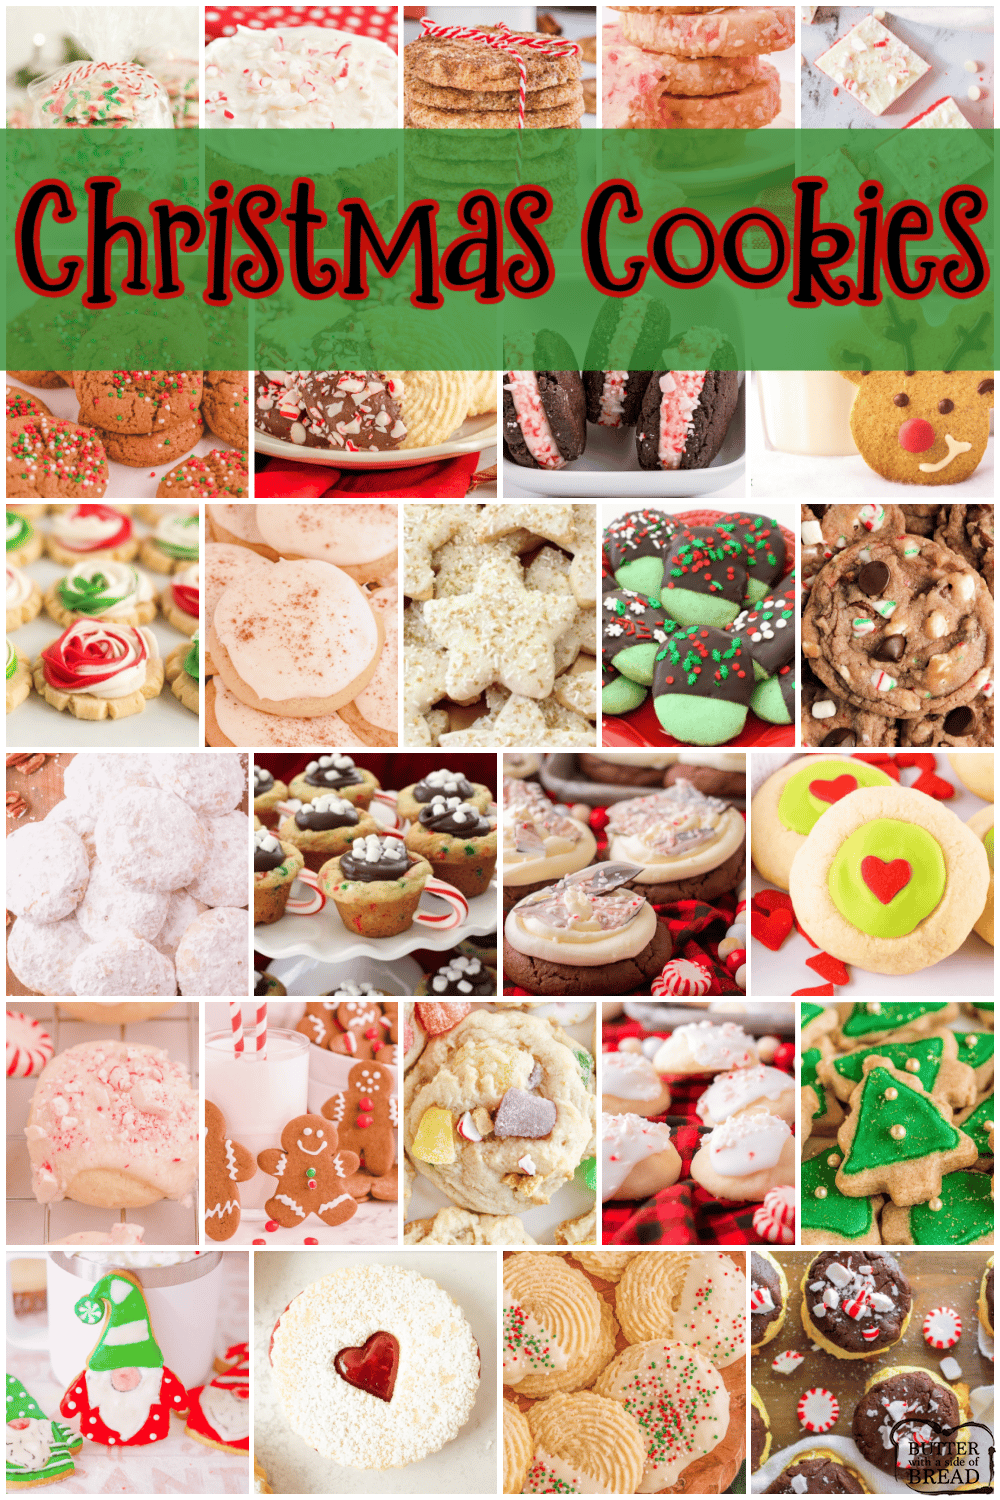 Best collection of easy Christmas Cookies ever- they’re even approved for Santa himself! Our Christmas cookies are perfect for holiday parties, cookie exchanges and neighbor goodie plates! via @buttergirls